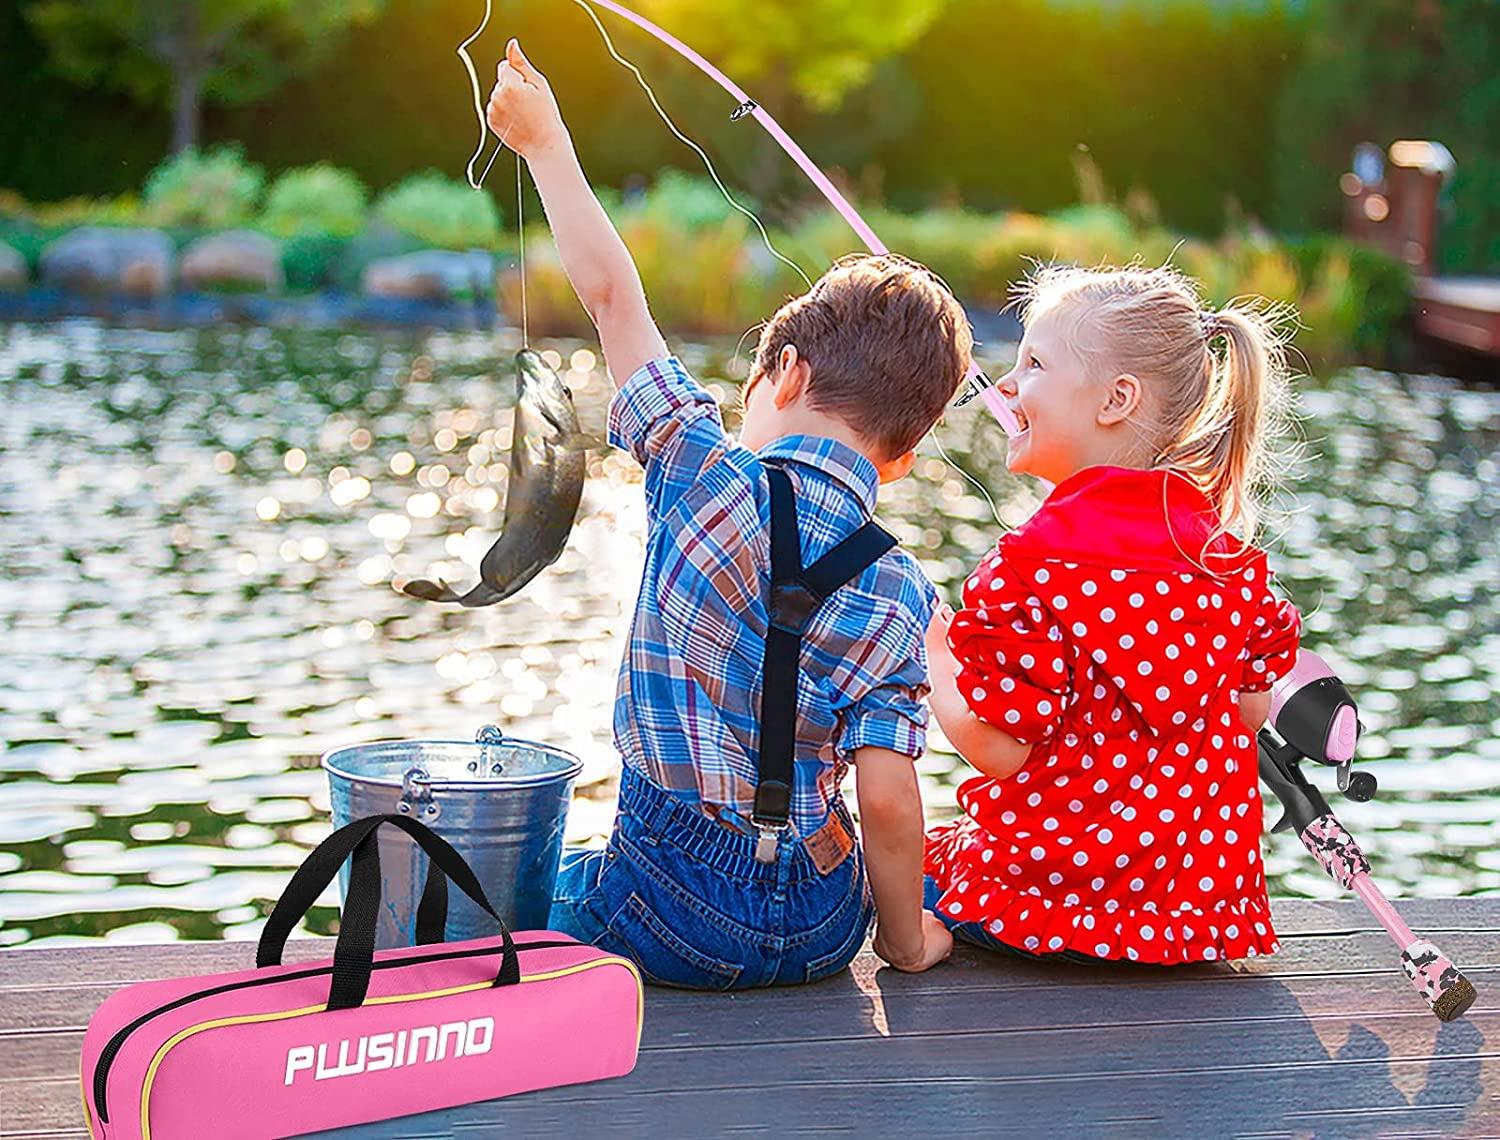 Fishing Rod Combo and Spincast Reel For Kids